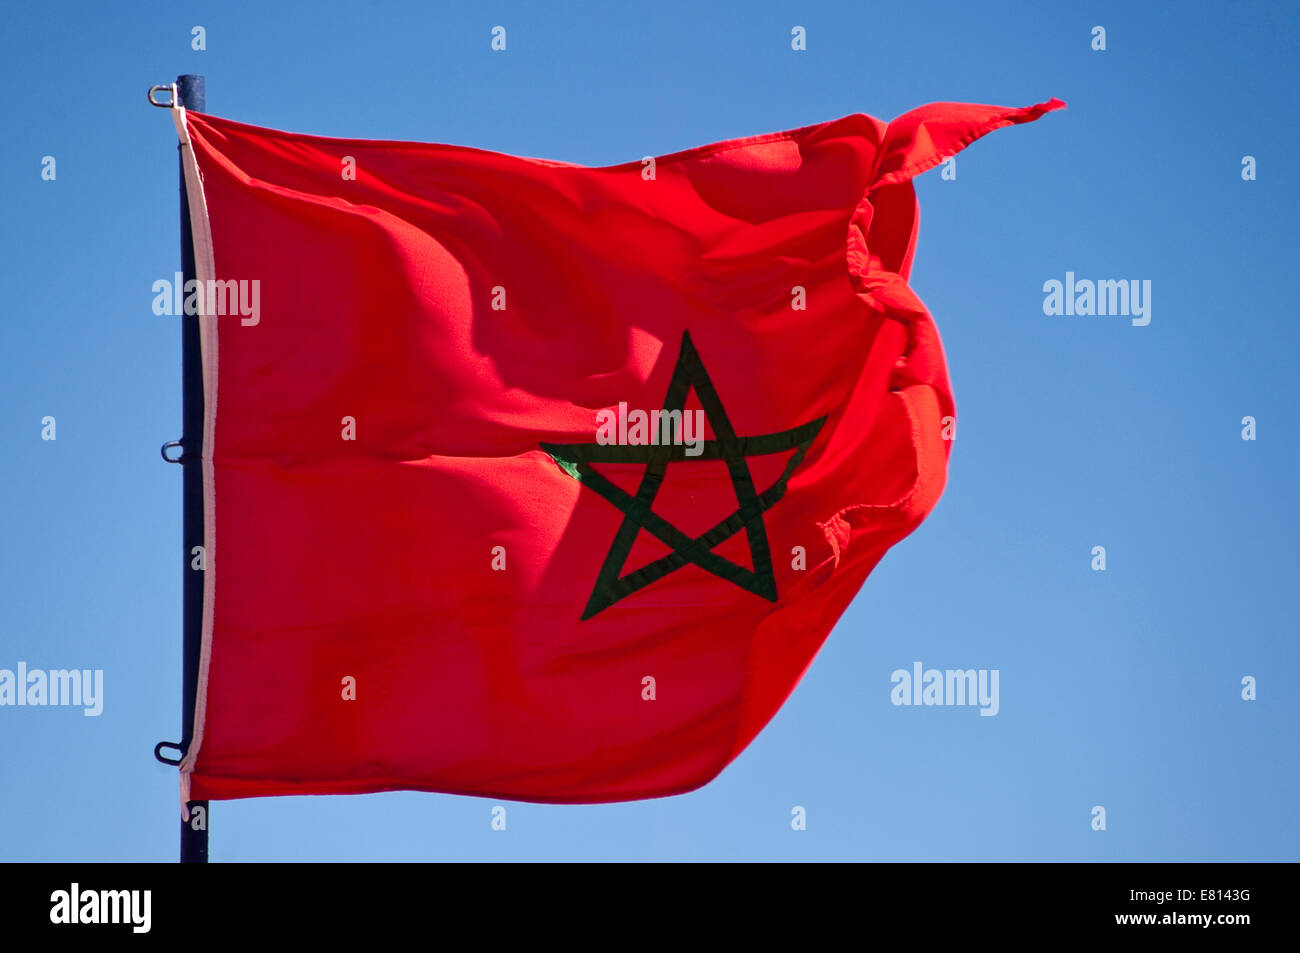 Horizontal close up of the national flag of Morocco against a blue sky. Stock Photo